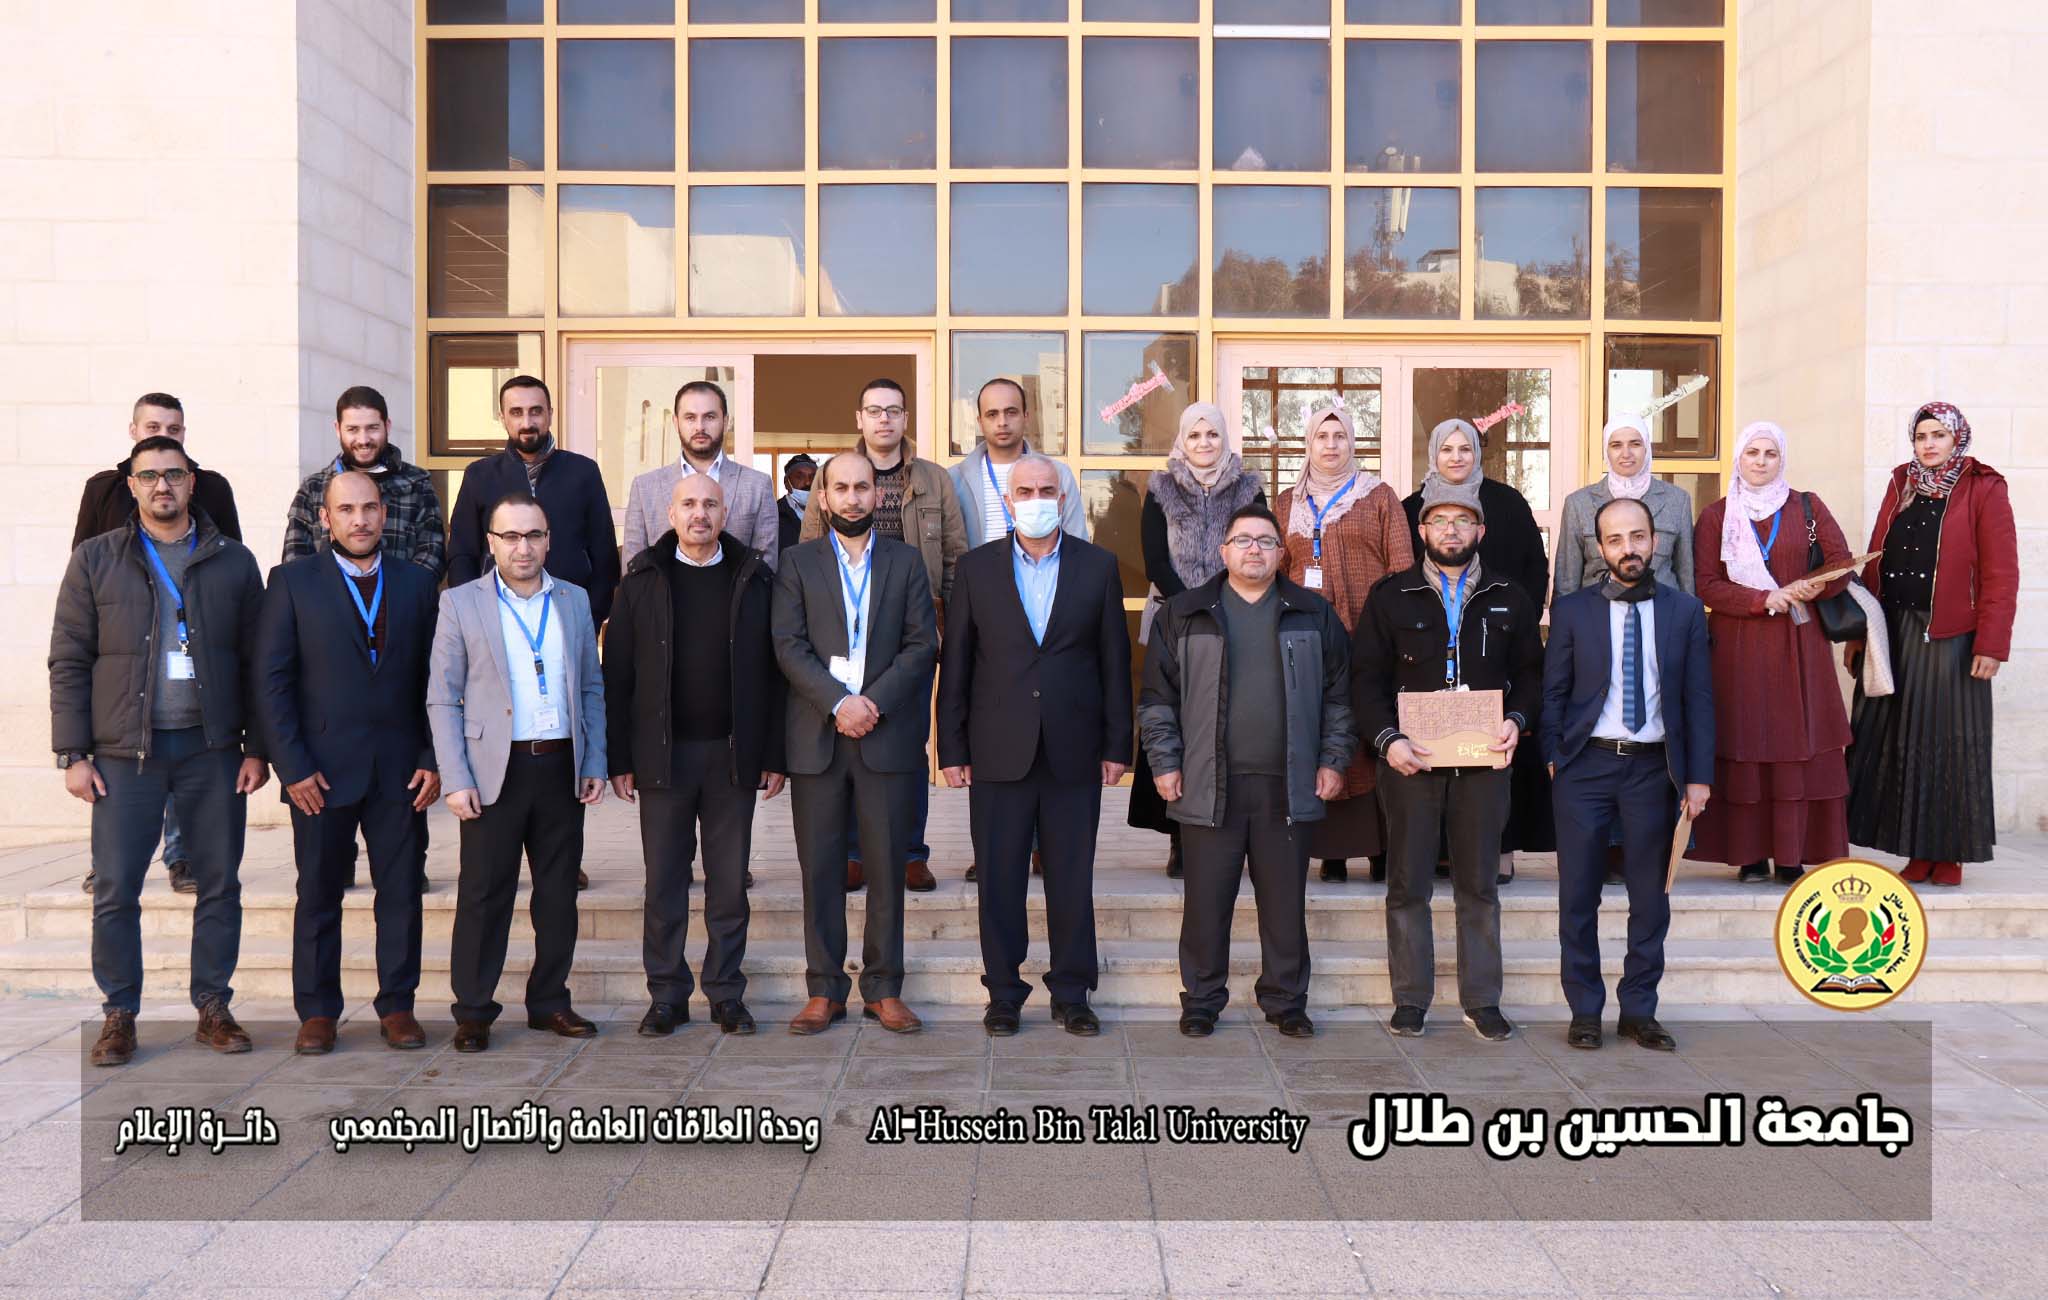 The conclusion of the training workshop (Internet of Things curriculum) at Al-Hussein Bin Talal University